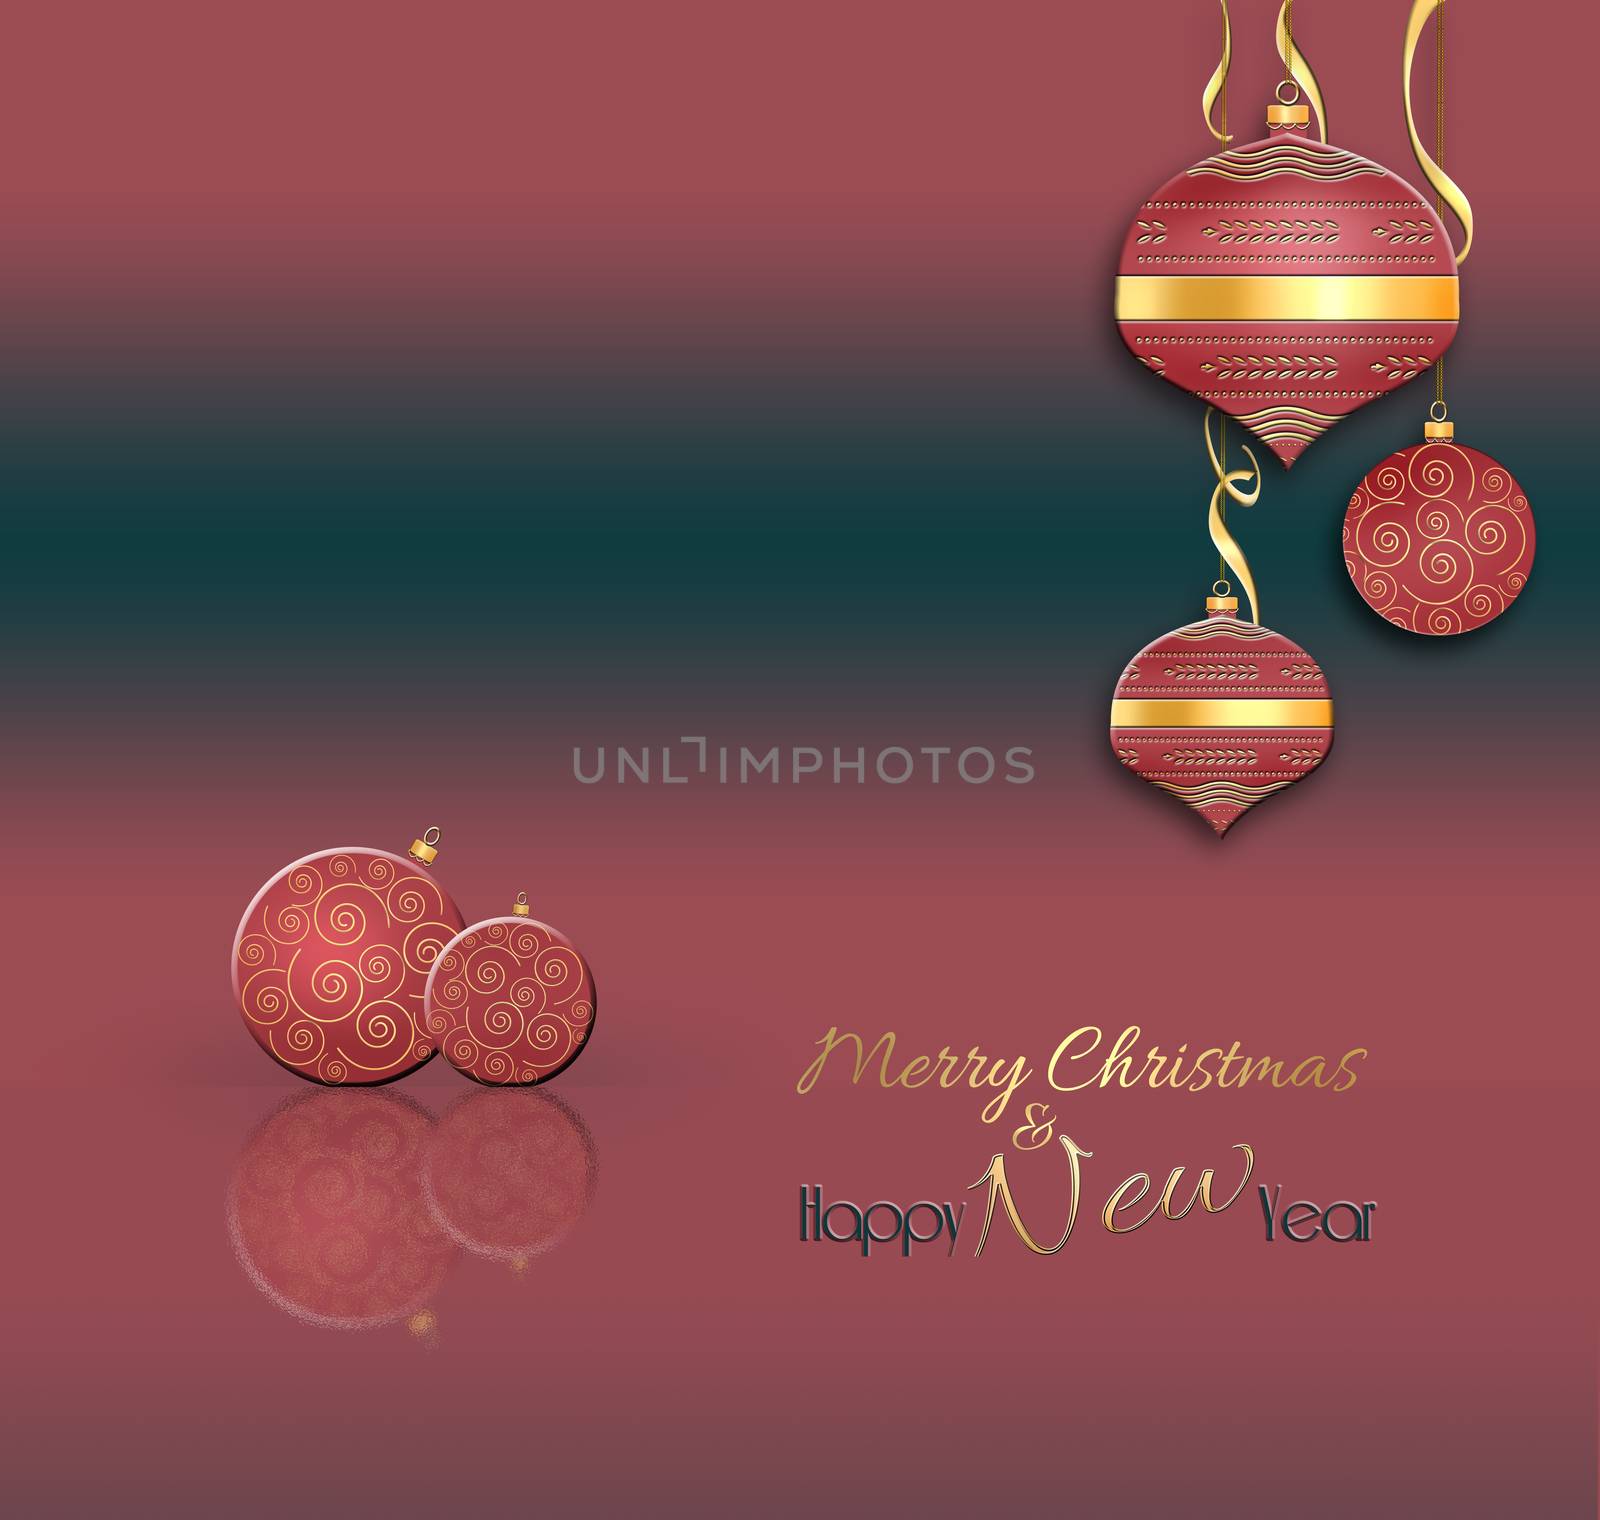 Christmas and New Year balls background. Hanging red decorative bauble with gold decor on red black background. Text Merry Christmas Happy New year. 3D illustration